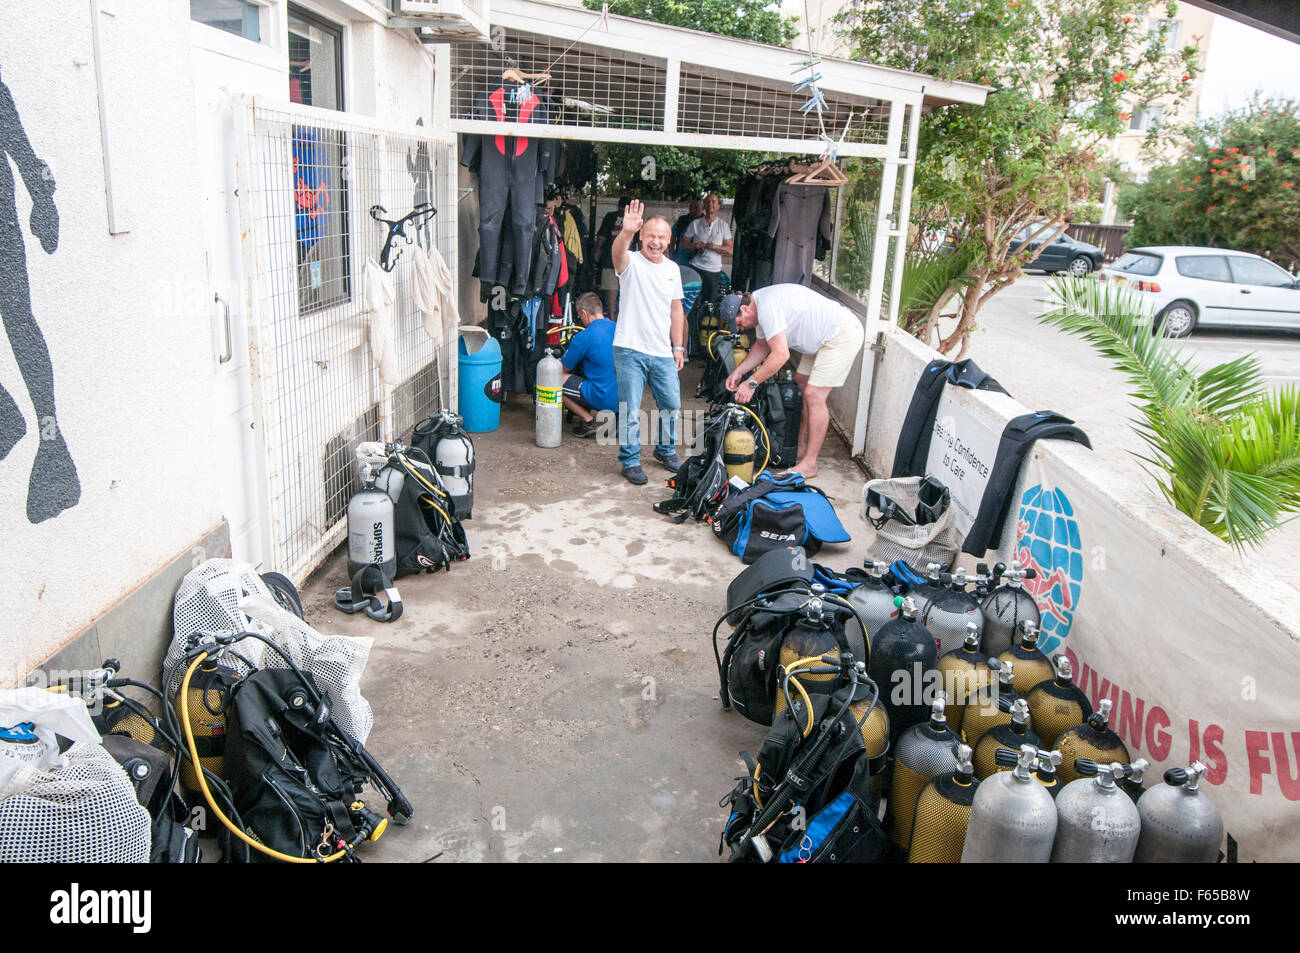 A SCUBA diving club in Larnaca, Cyprus. Divers are readying their equipment Stock Photo